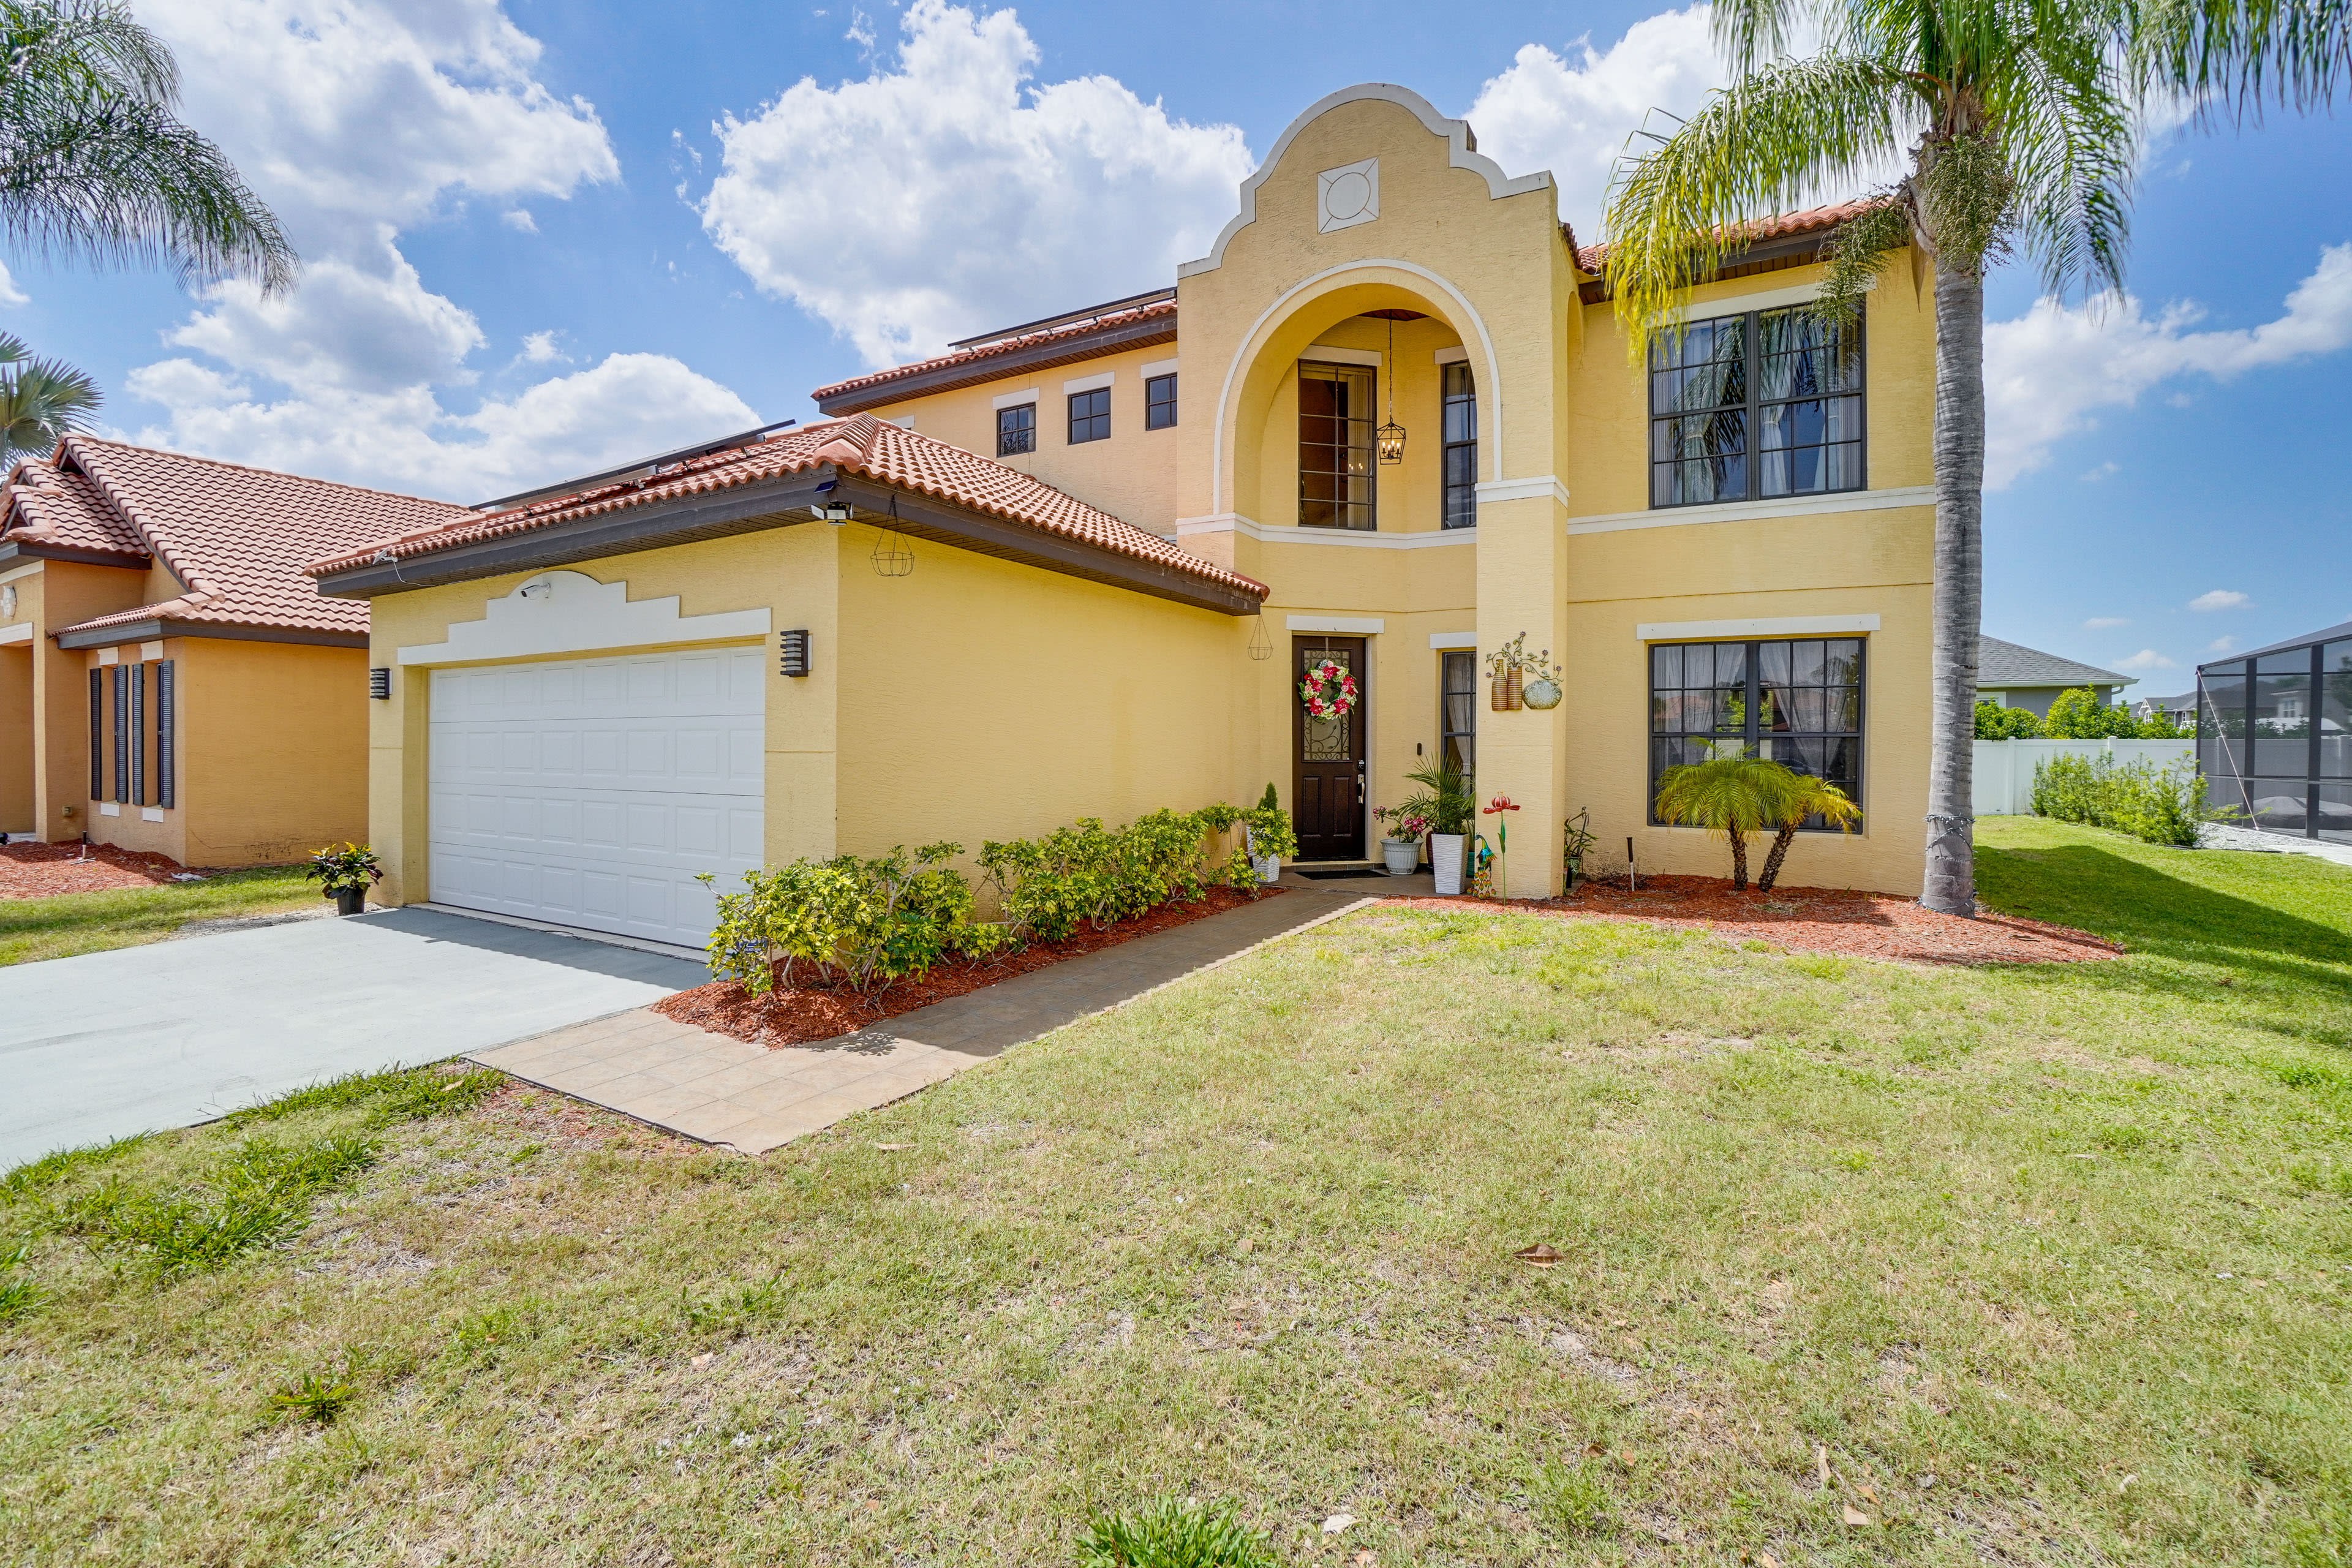 Kissimmee Vacation Rental | 5BR | 3BA | 2,273 Sq Ft | Stairs Required